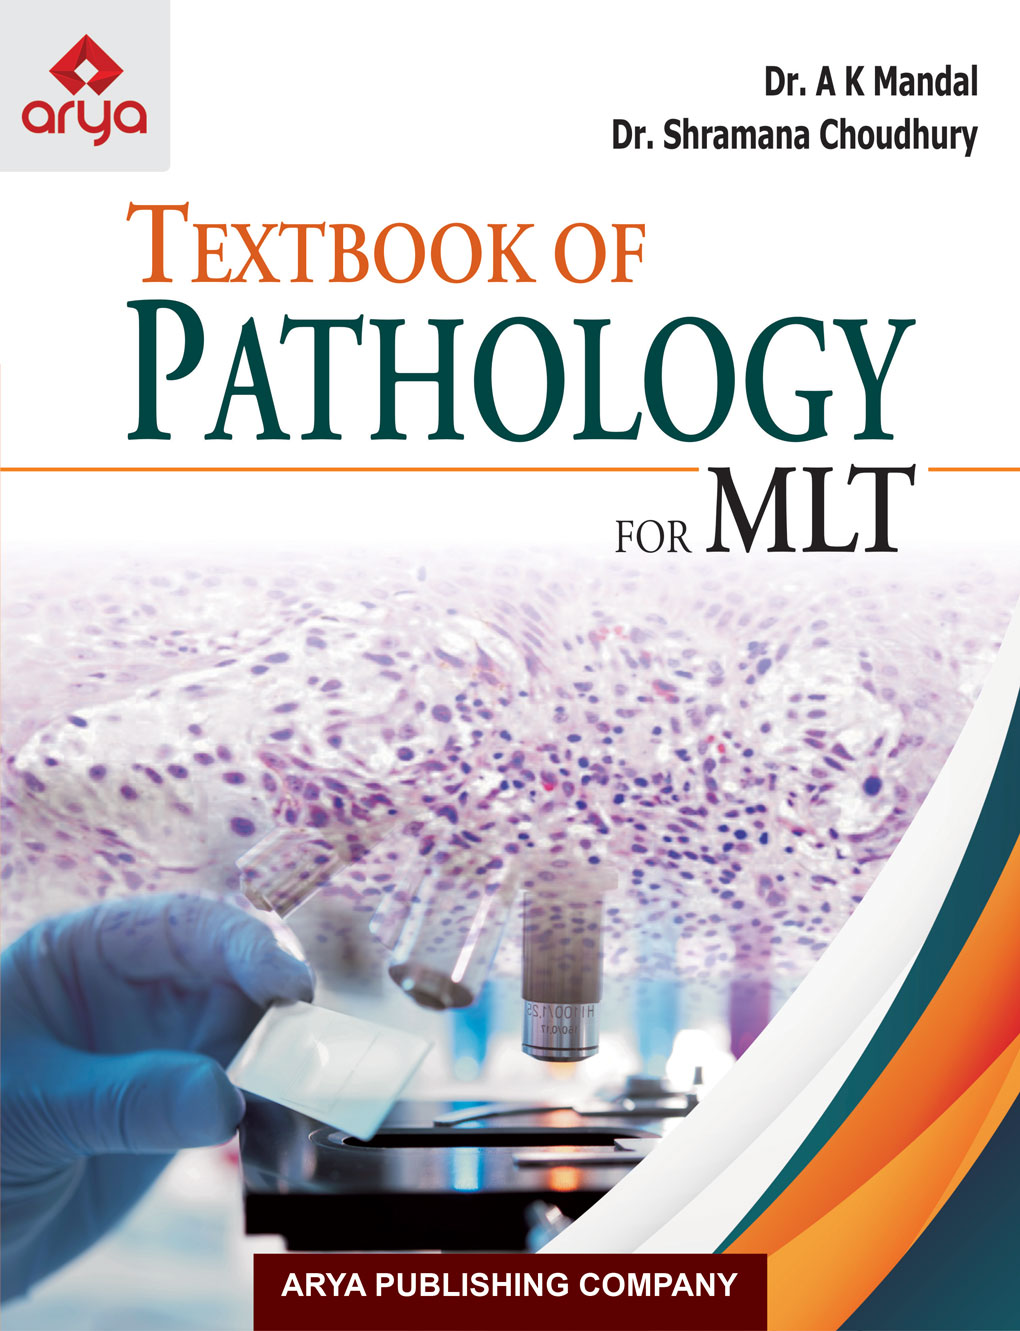 Textbook of Pathology for MLT